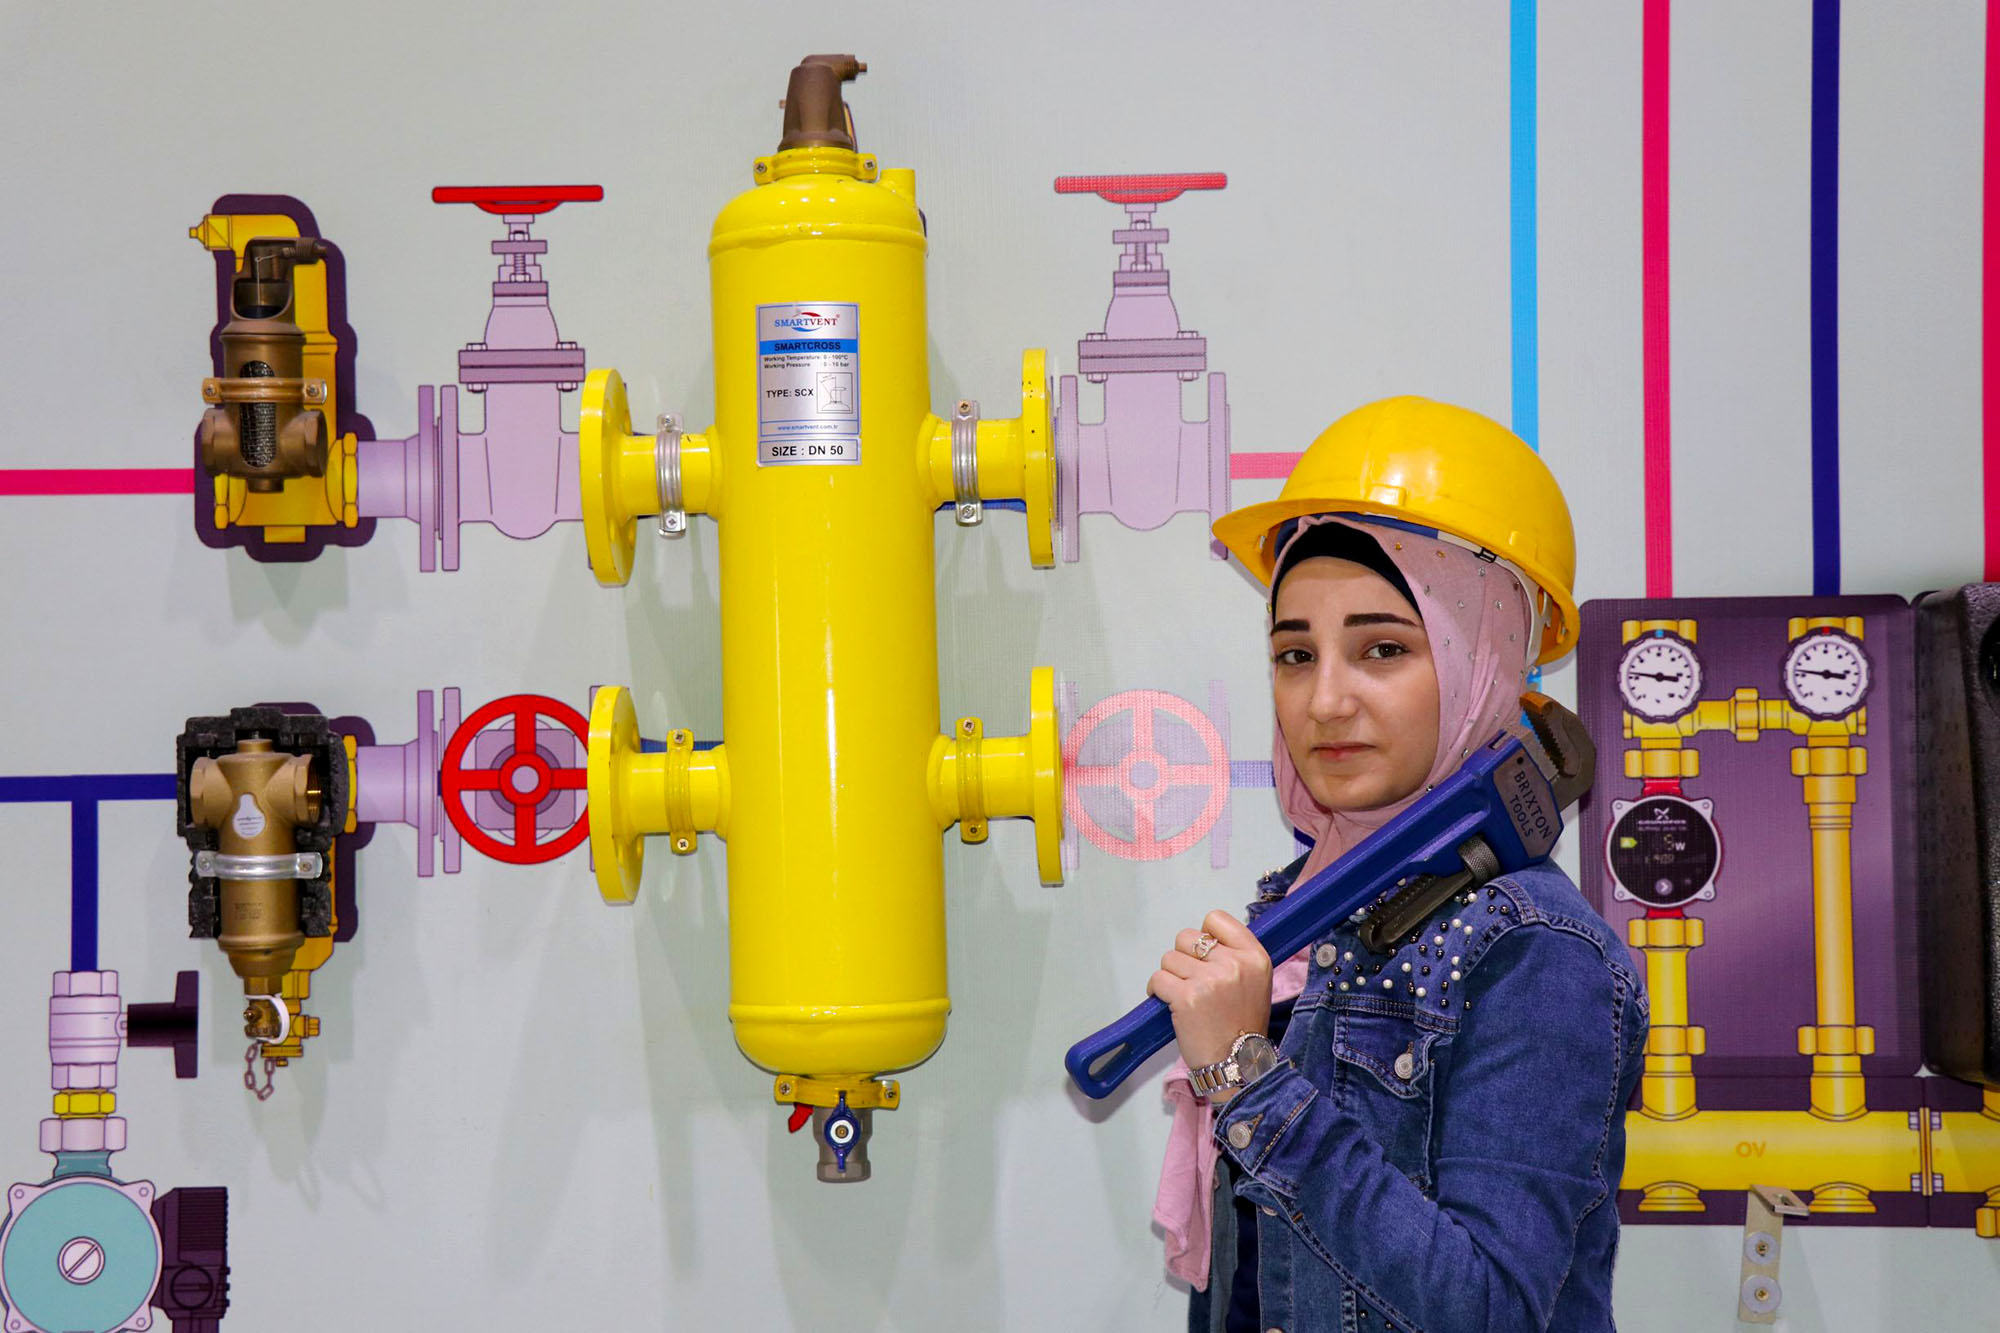 Anera’s vocational training and education program gives Palestinians, like this aspiring plumber Nivine, a chance to enroll in accredited institutions and increase their employability. 